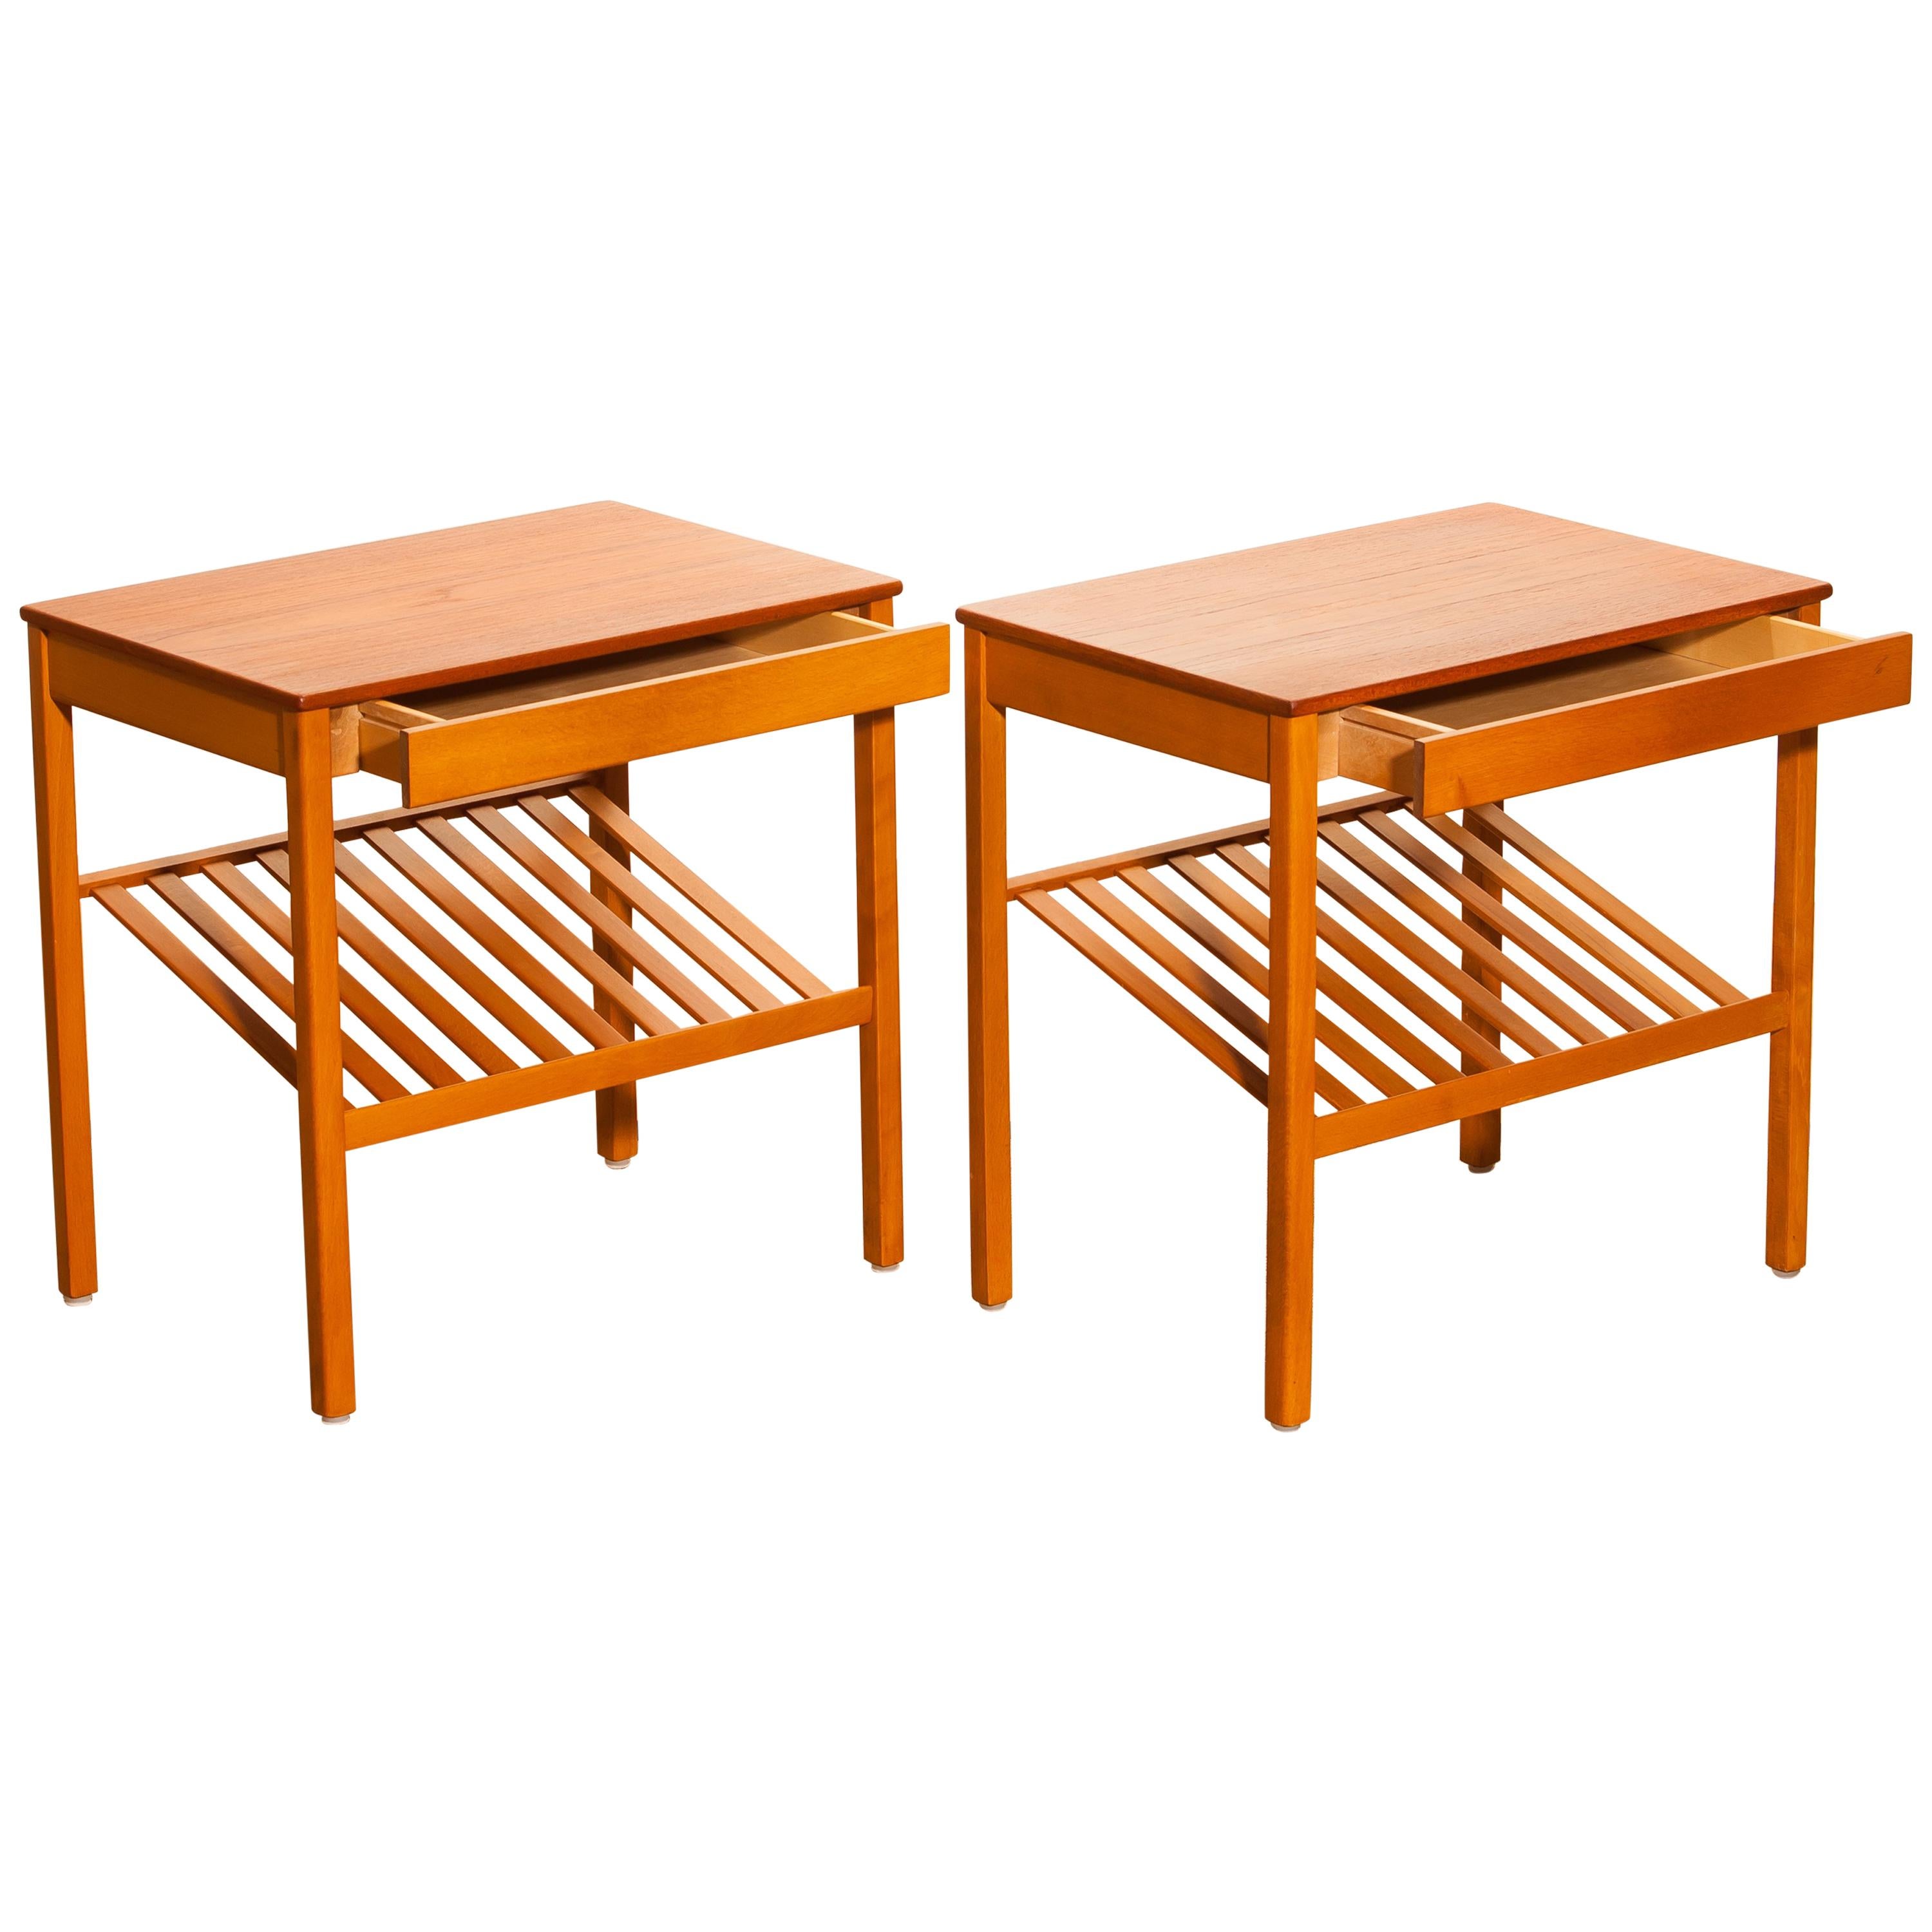 Beautiful pair of large nightstands, side tables designed by Jean Huber for Tingstroms - Bra Bohag, Sweden.
These bedside tables are made of teak and have a drawer and a magazine rack.
They are in wonderful condition.
Period 1950s
Dimensions: H